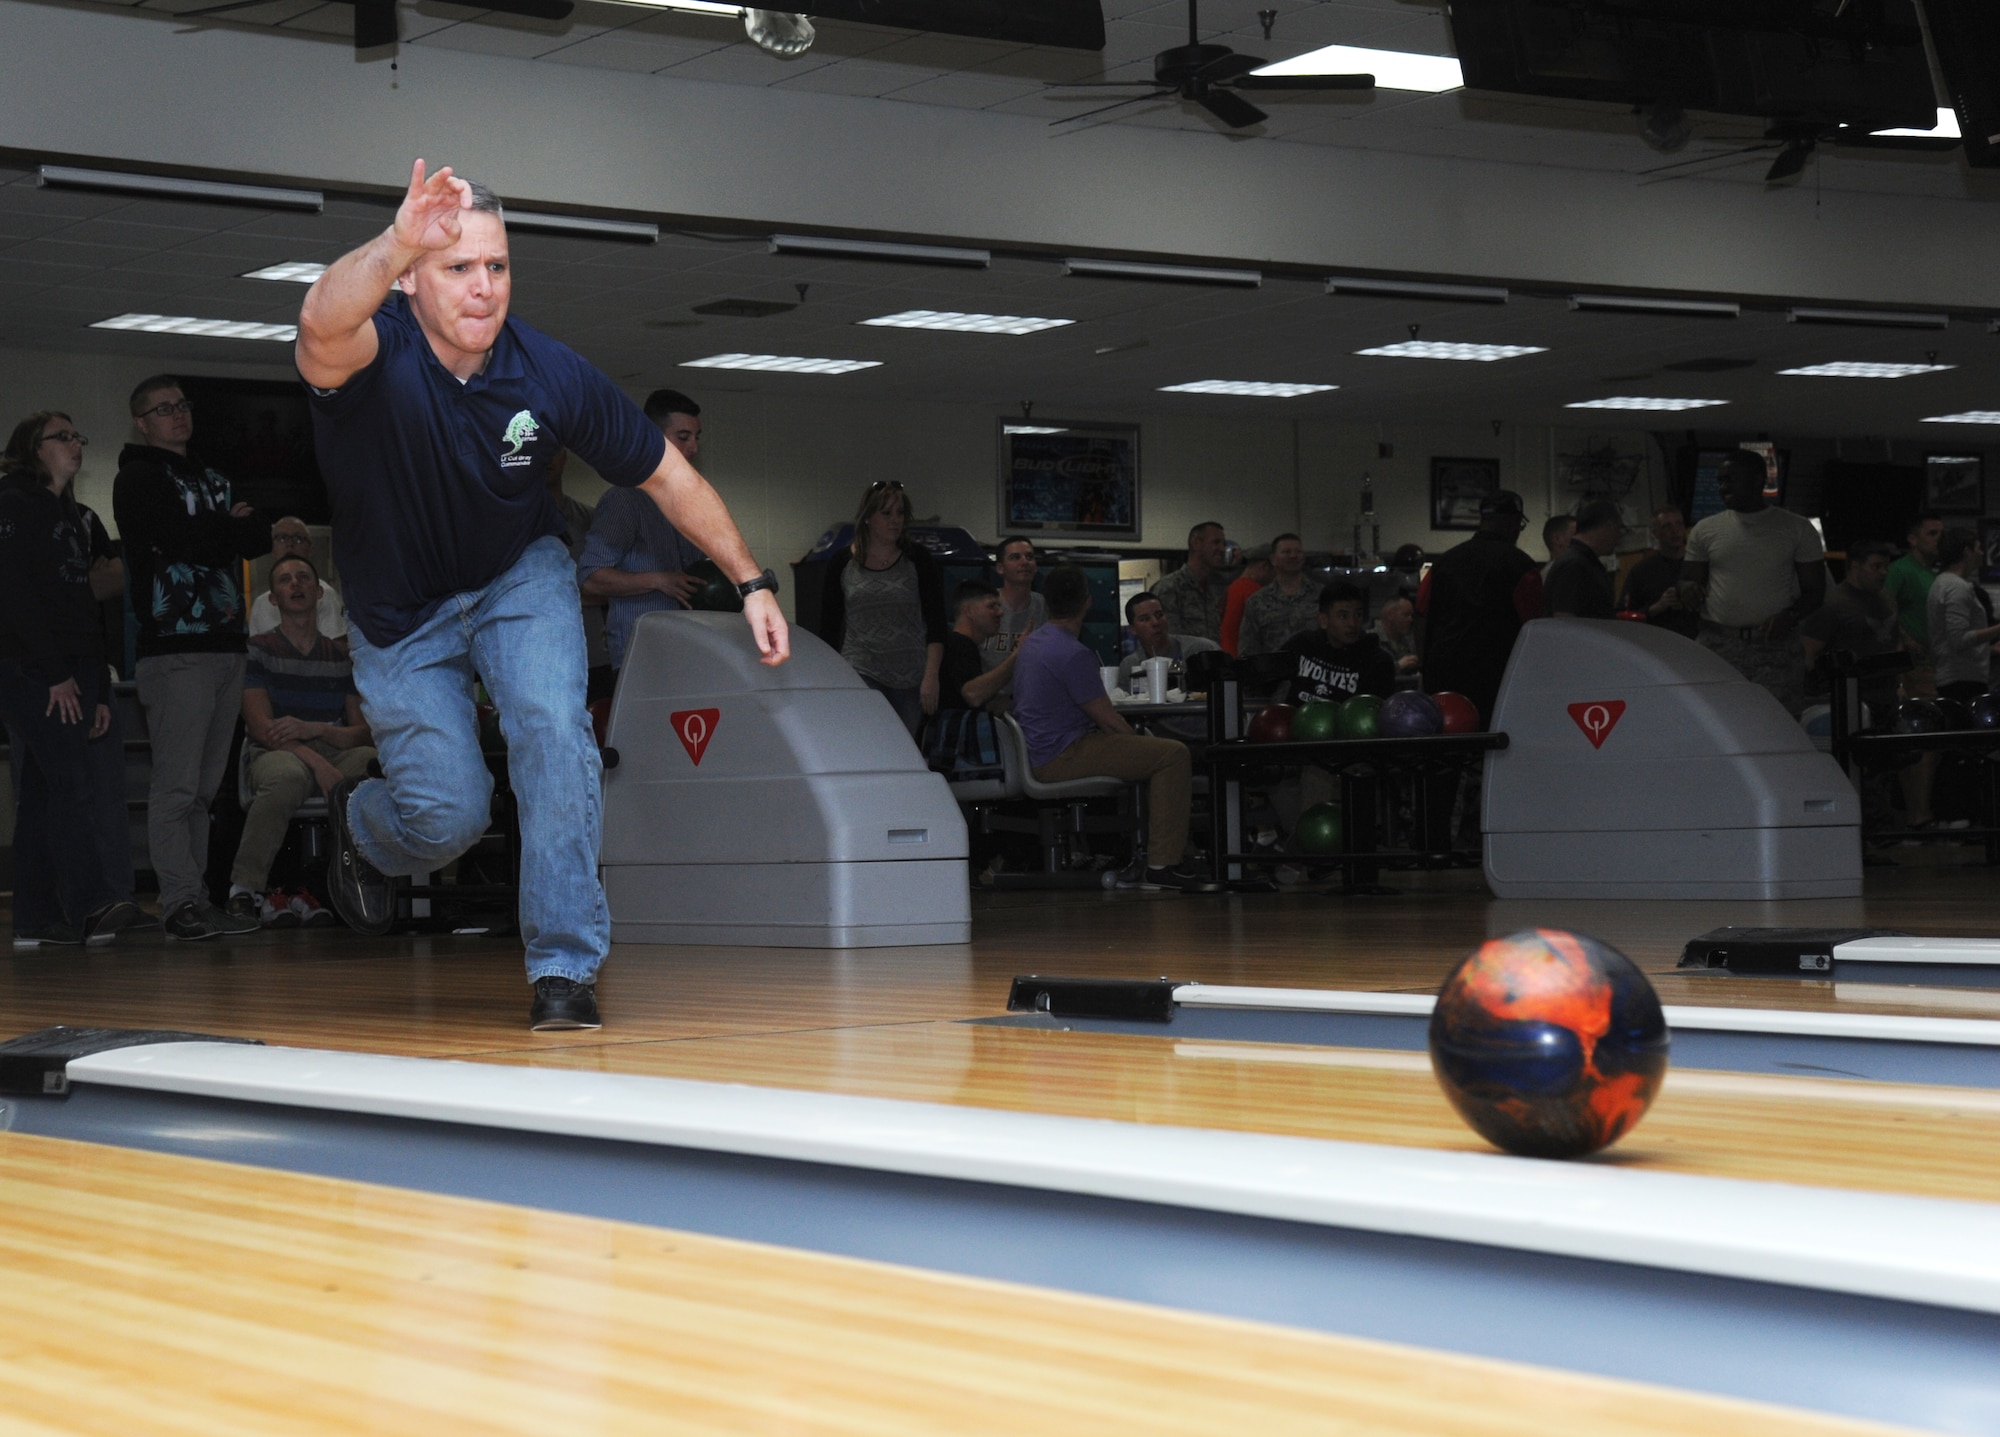 Lt. Col. Kevin Bray, 334th Training Squadron commander, sends his ball down the lane during a bowling tournament Feb. 13, 2015, at Gaudé Bowling Lanes, Keesler Air Force Base, Miss.  The African-American Heritage Committee hosted the event to celebrate Black History Month.  Nineteen teams of five people participated in the tournament.  (U.S. Air Force photo by Kemberly Groue)